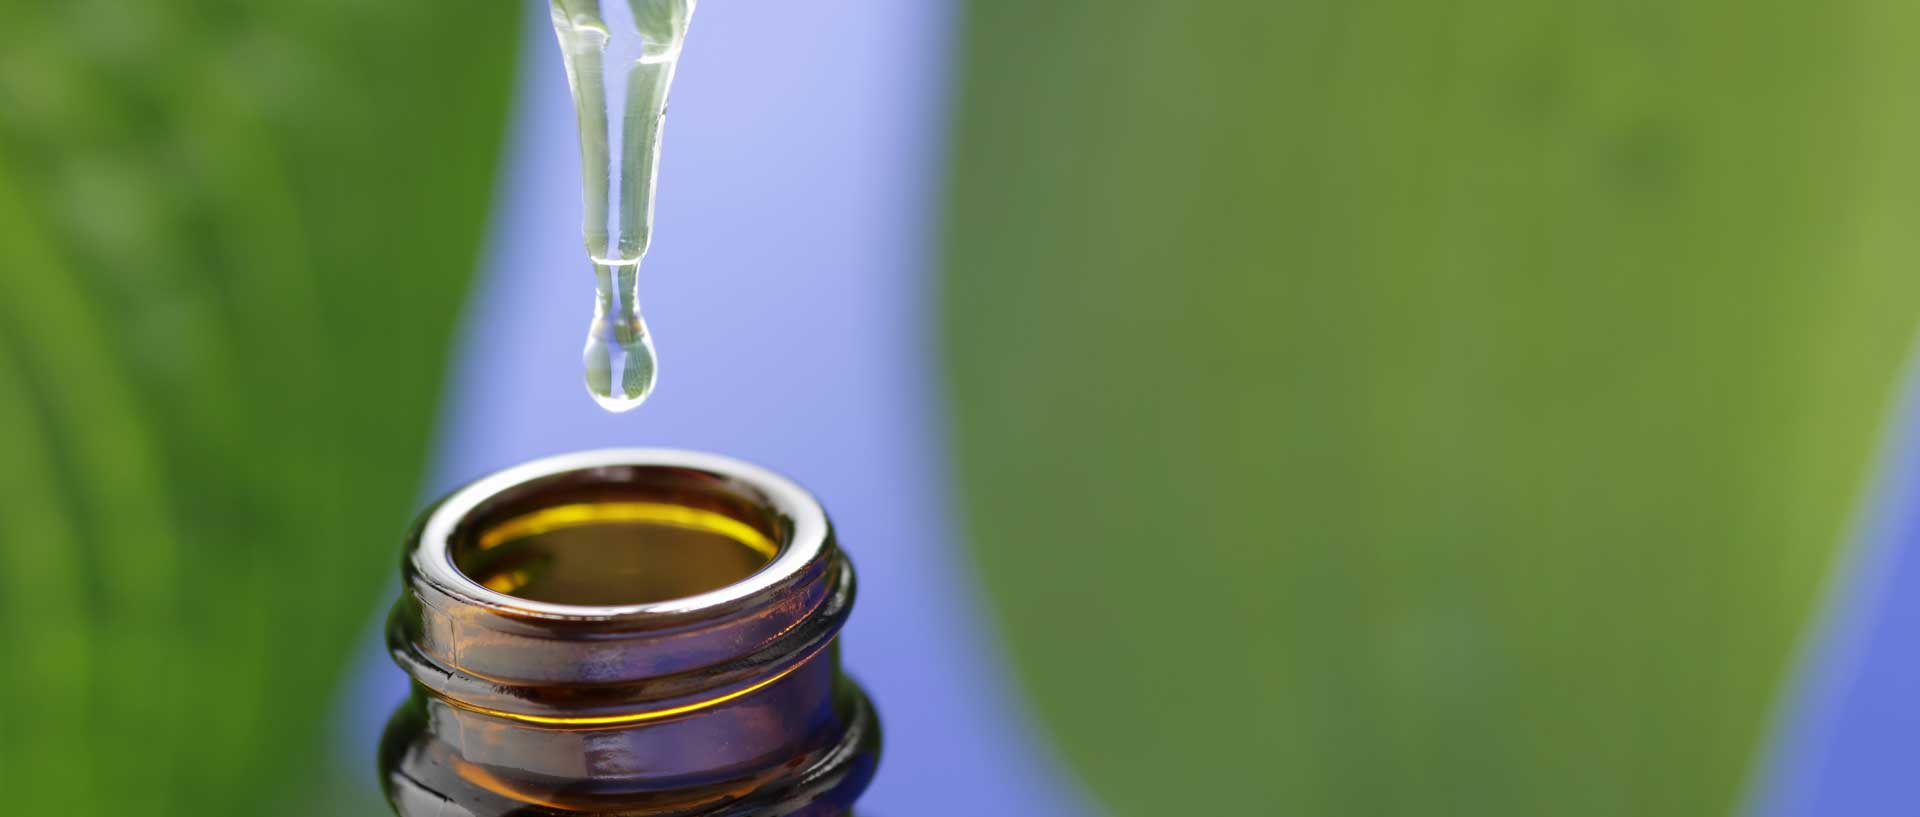 Does Tea Tree Oil Work? - Consumer Reports